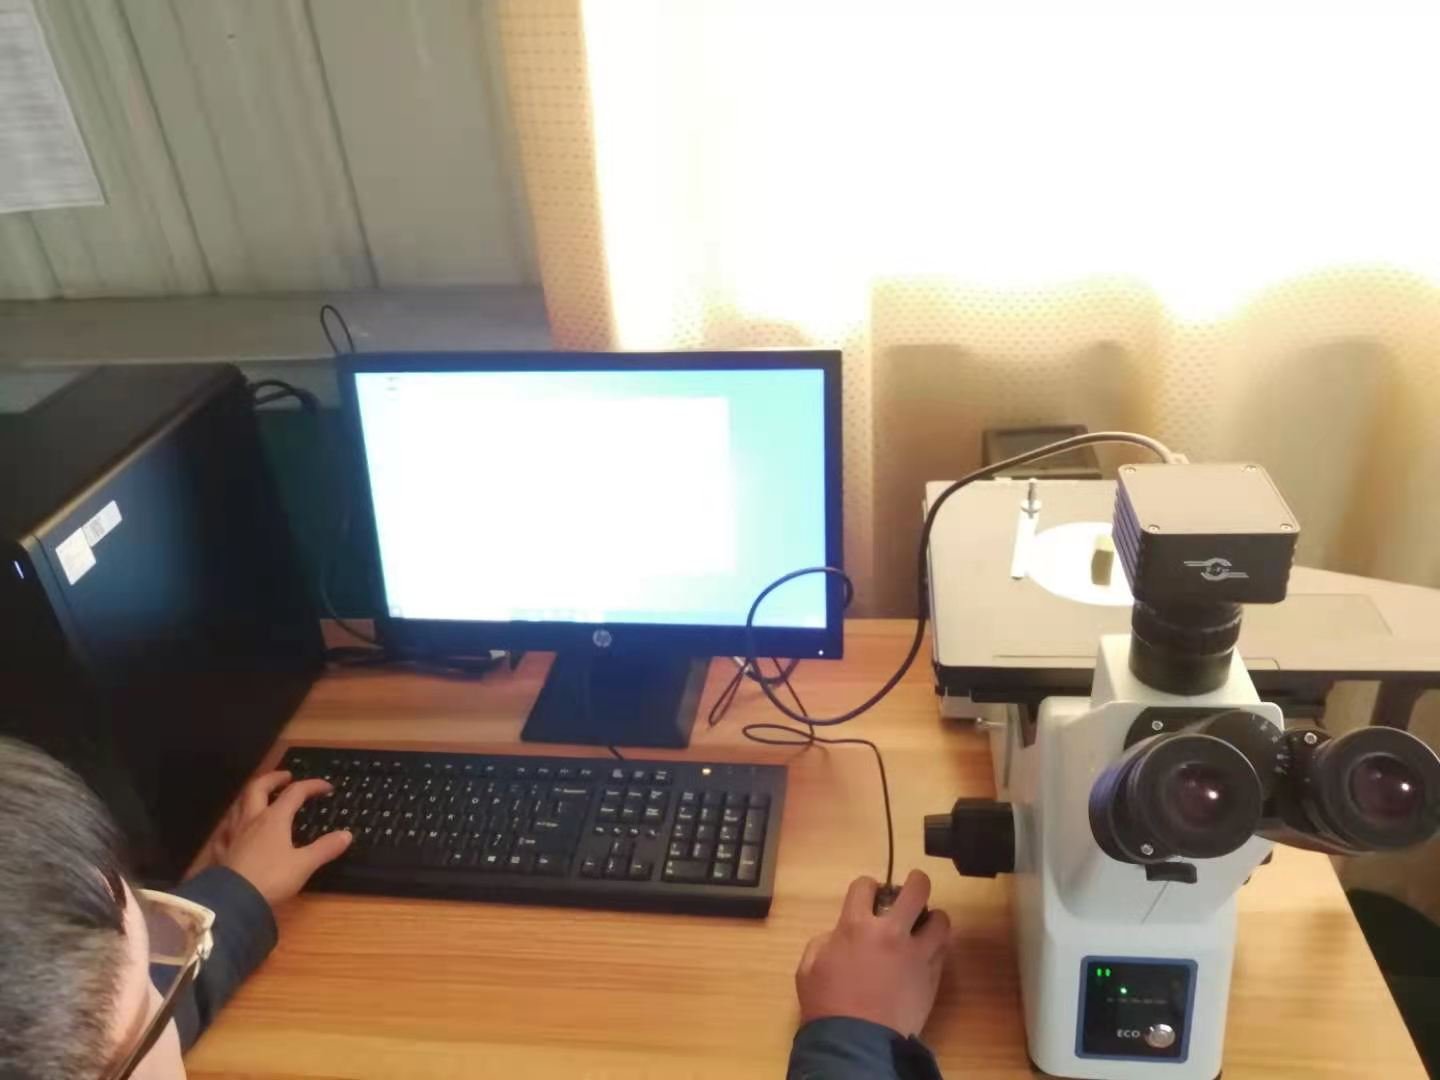 [Good News] Shandong Zhengxiang Introduces Metallographic Microscope to Help High Quality